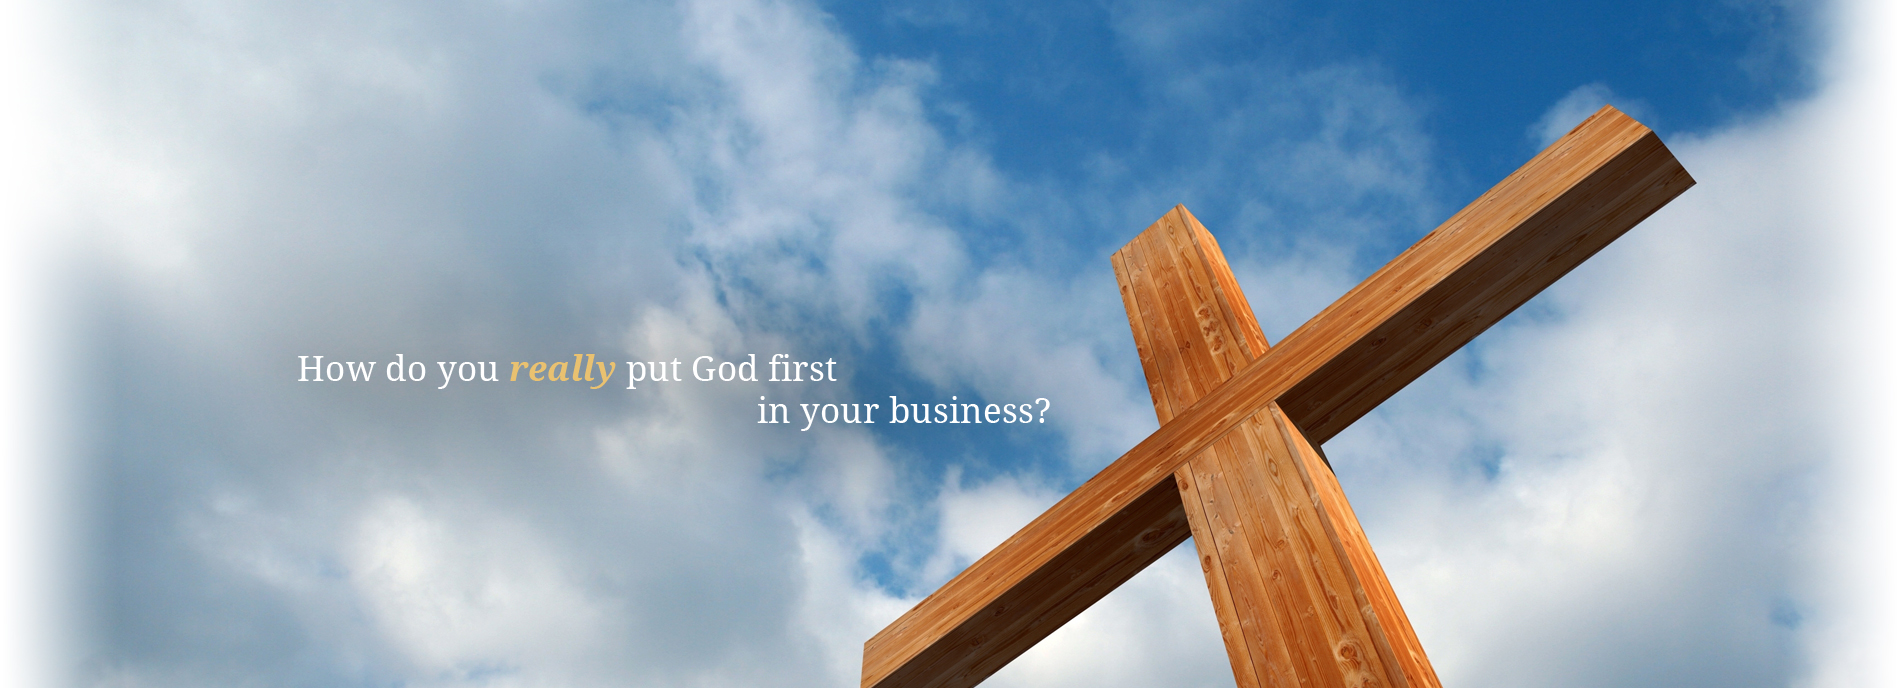 Christian Business in the Beaumont area, church contractors in Beaumont Tx, church marketing Beaumont Tx, church advertising Beaumont Tx, SEO Beaumont Tx, SEO marketing Beaumont Tx, SEO advertising Beaumont Tx, SEO marketing SETX, SETX SEO, SETX SEO Advertising, SEO Southeast Texas, SEO marketing Southeast Texas, SEO advertising Southeast Texas